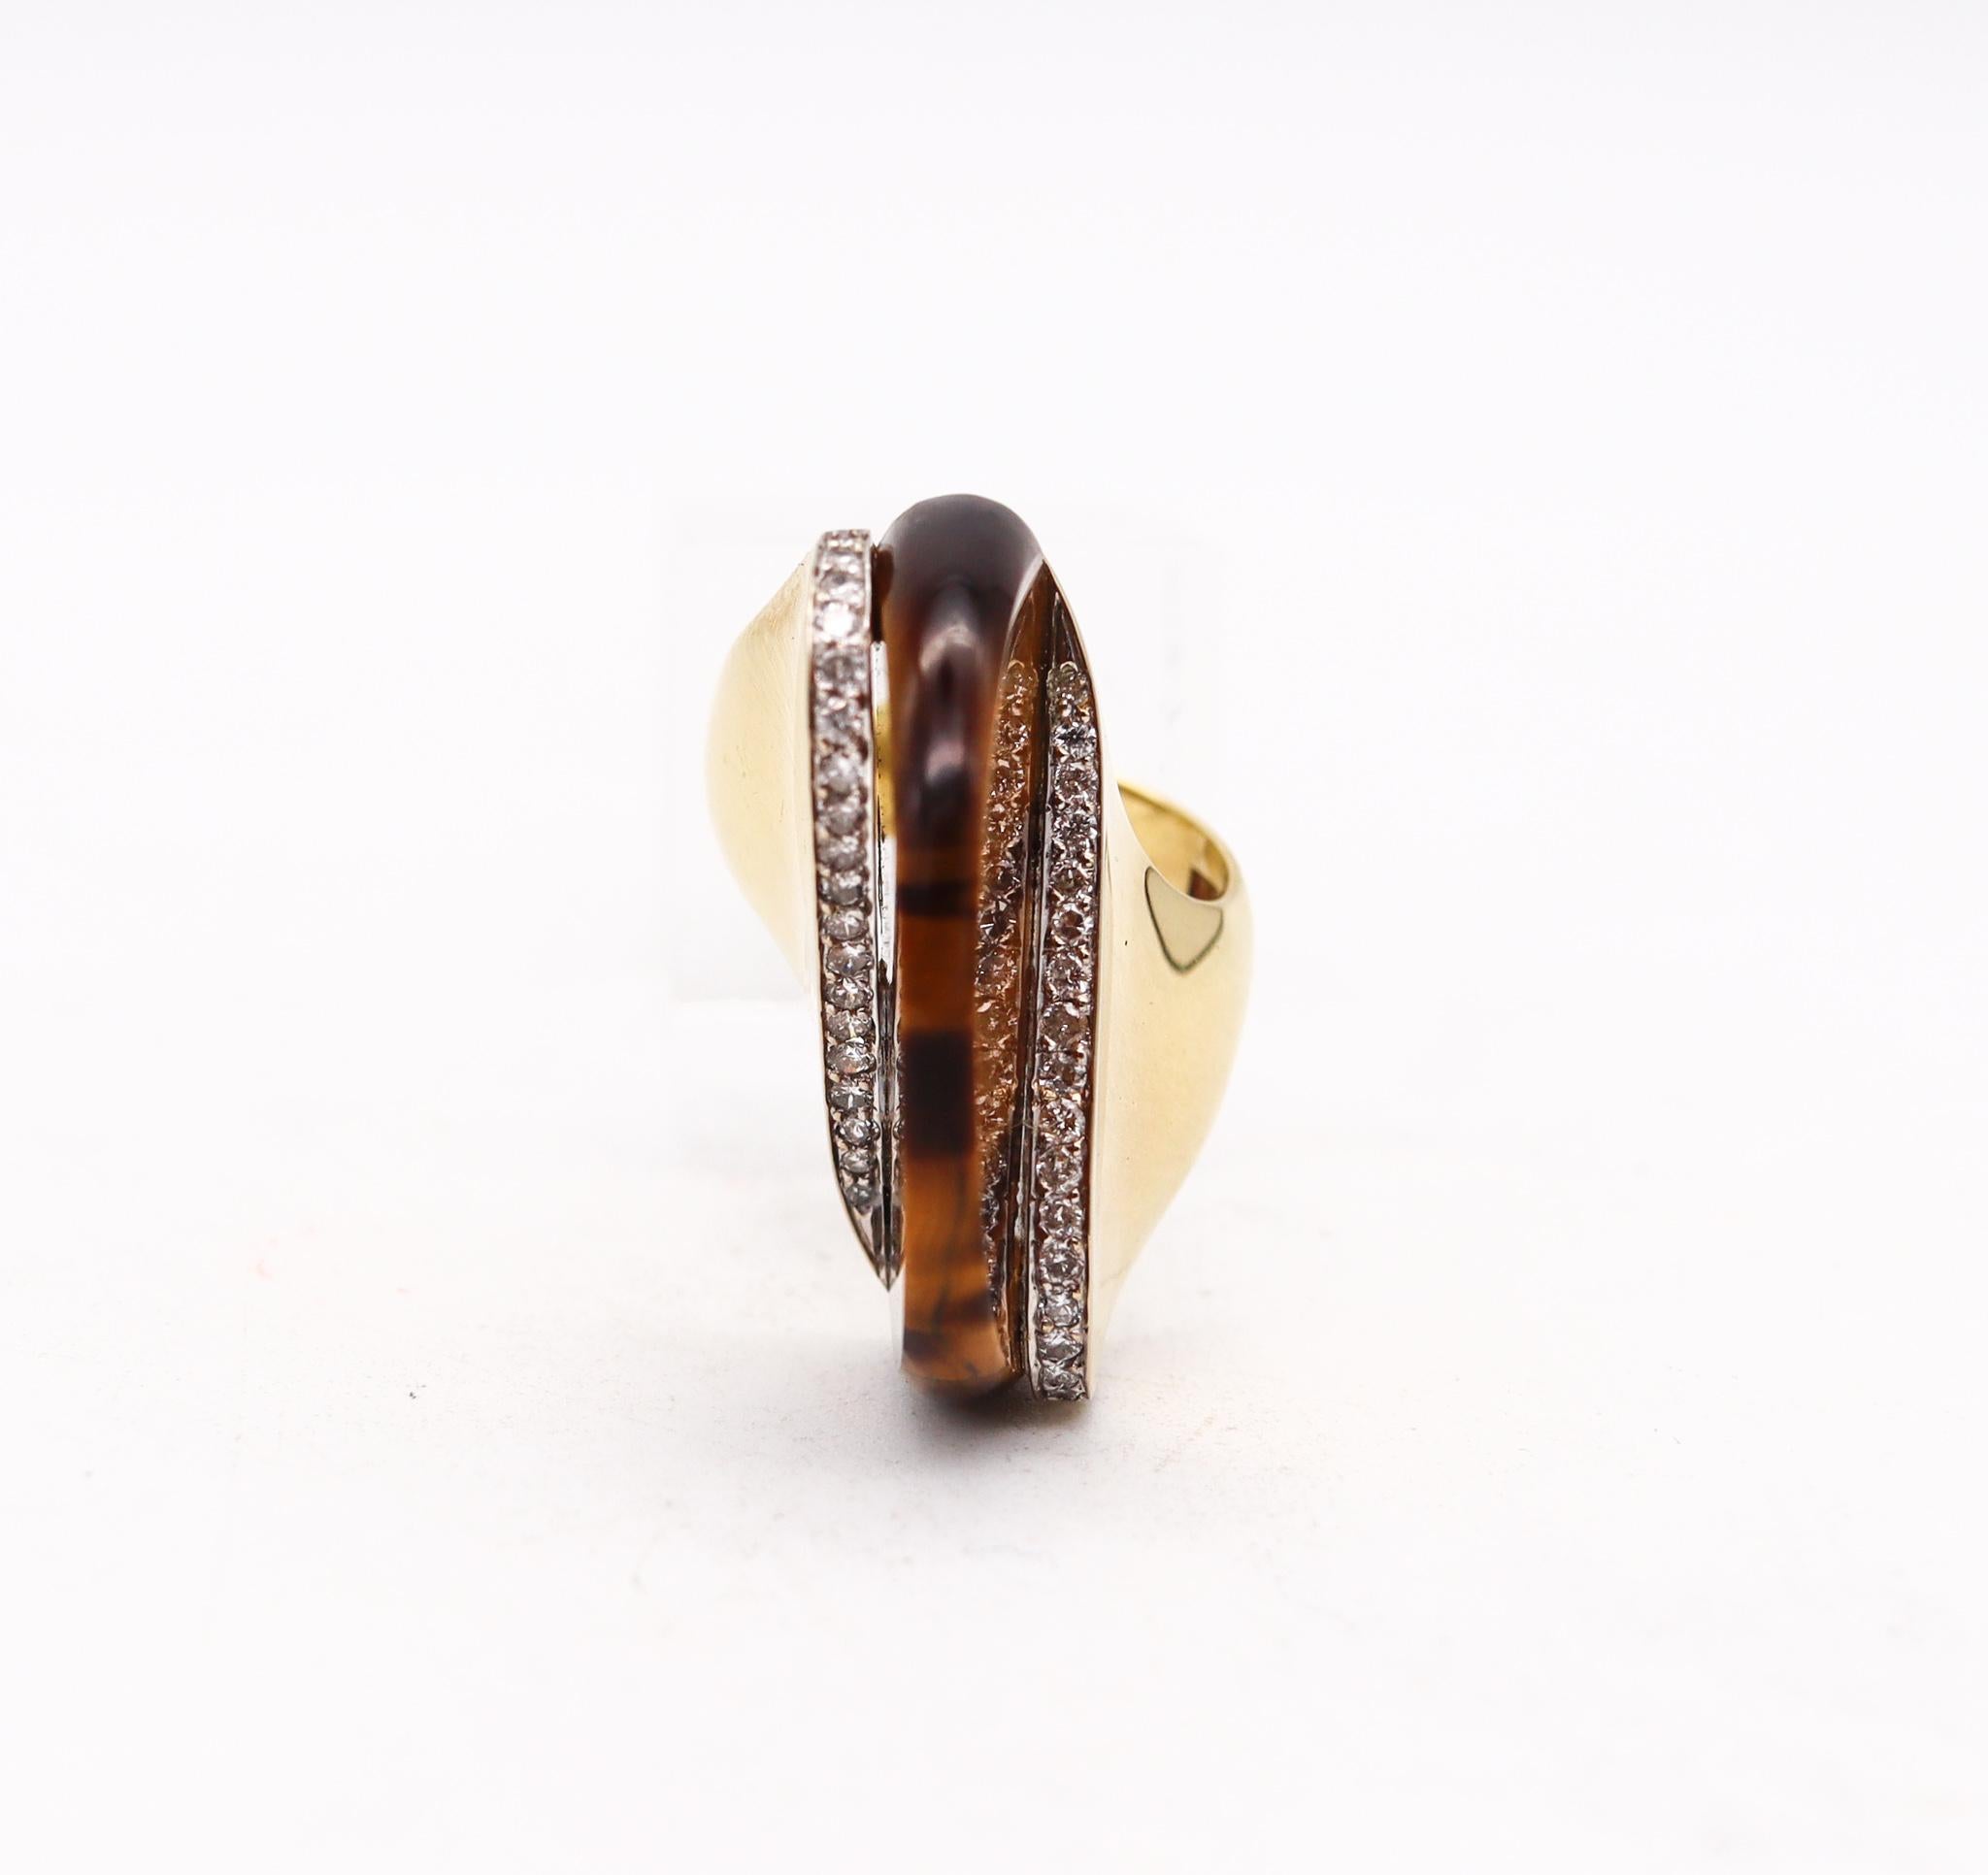 Sculptural Retro 1970 Cocktail Ring 18kt Gold with Diamonds and Tiger Eye Quartz 1